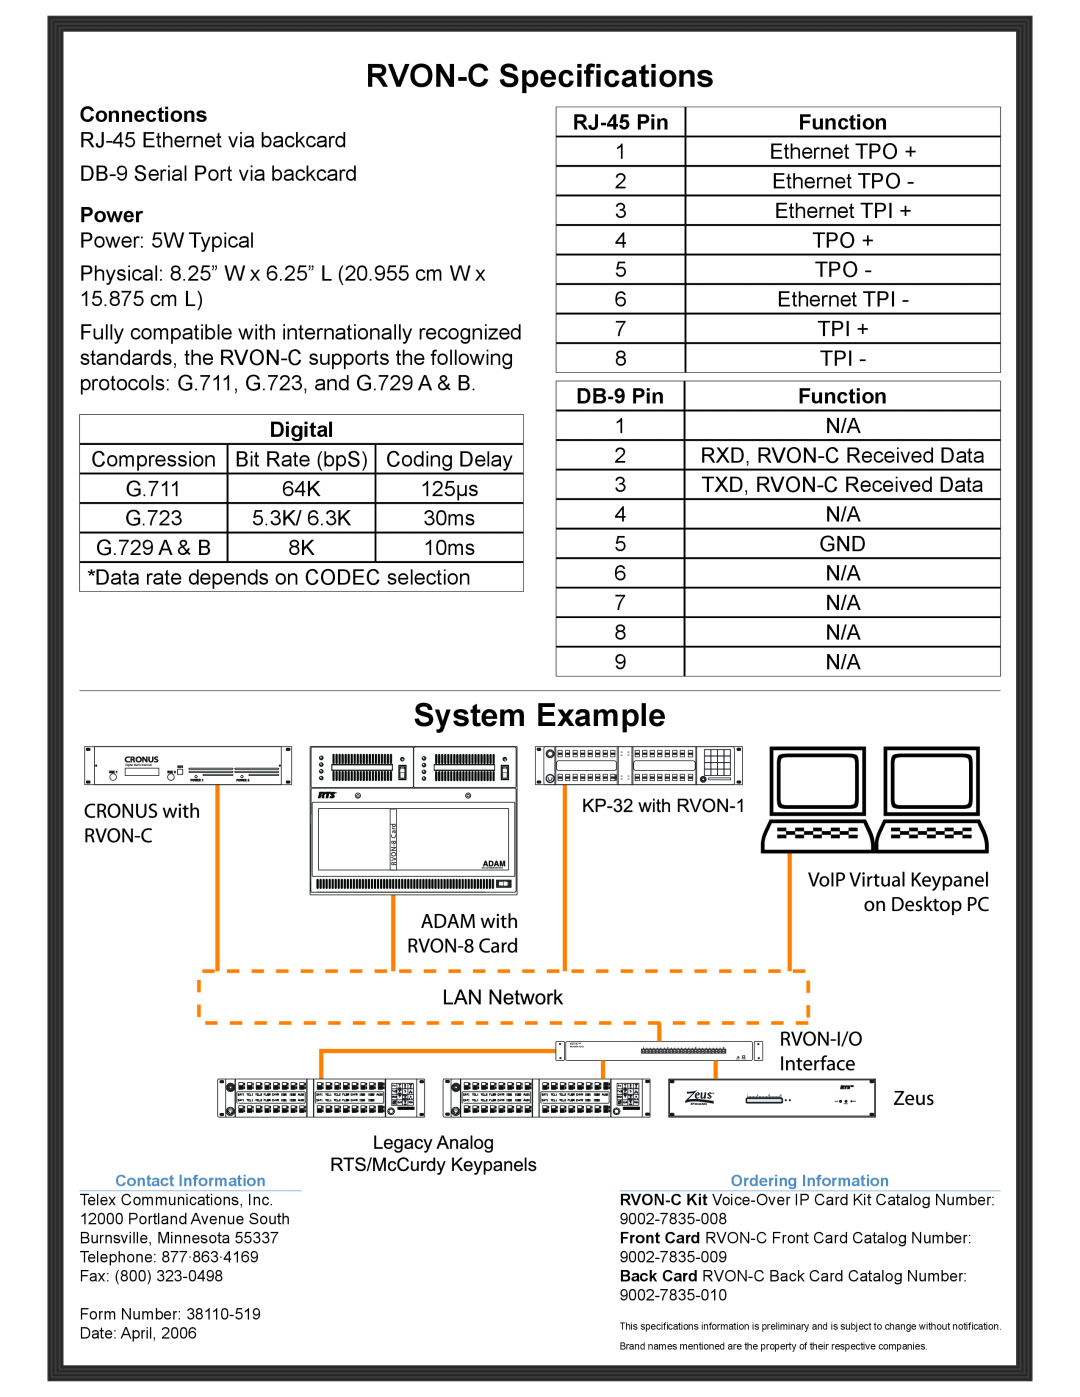 RTS manual RVON-C Specifications, System Example, Connections, Power, Digital, RJ-45 Pin, Function, DB-9 Pin 